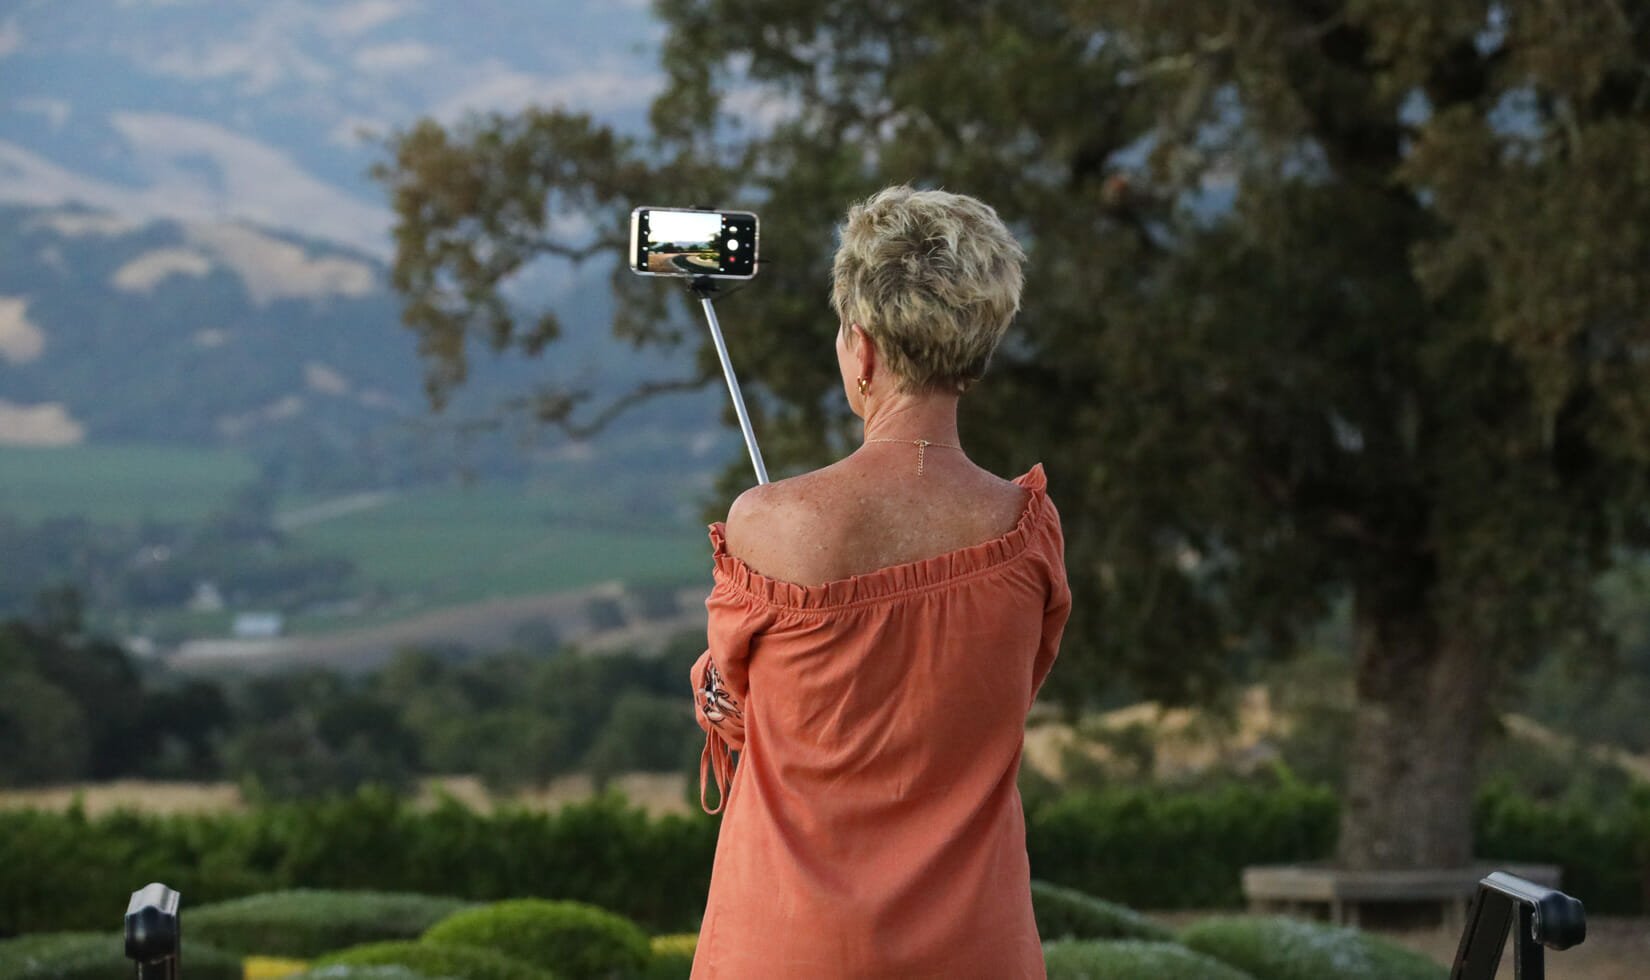 woman taking a picture with selfie stick at a Jordan Winery event